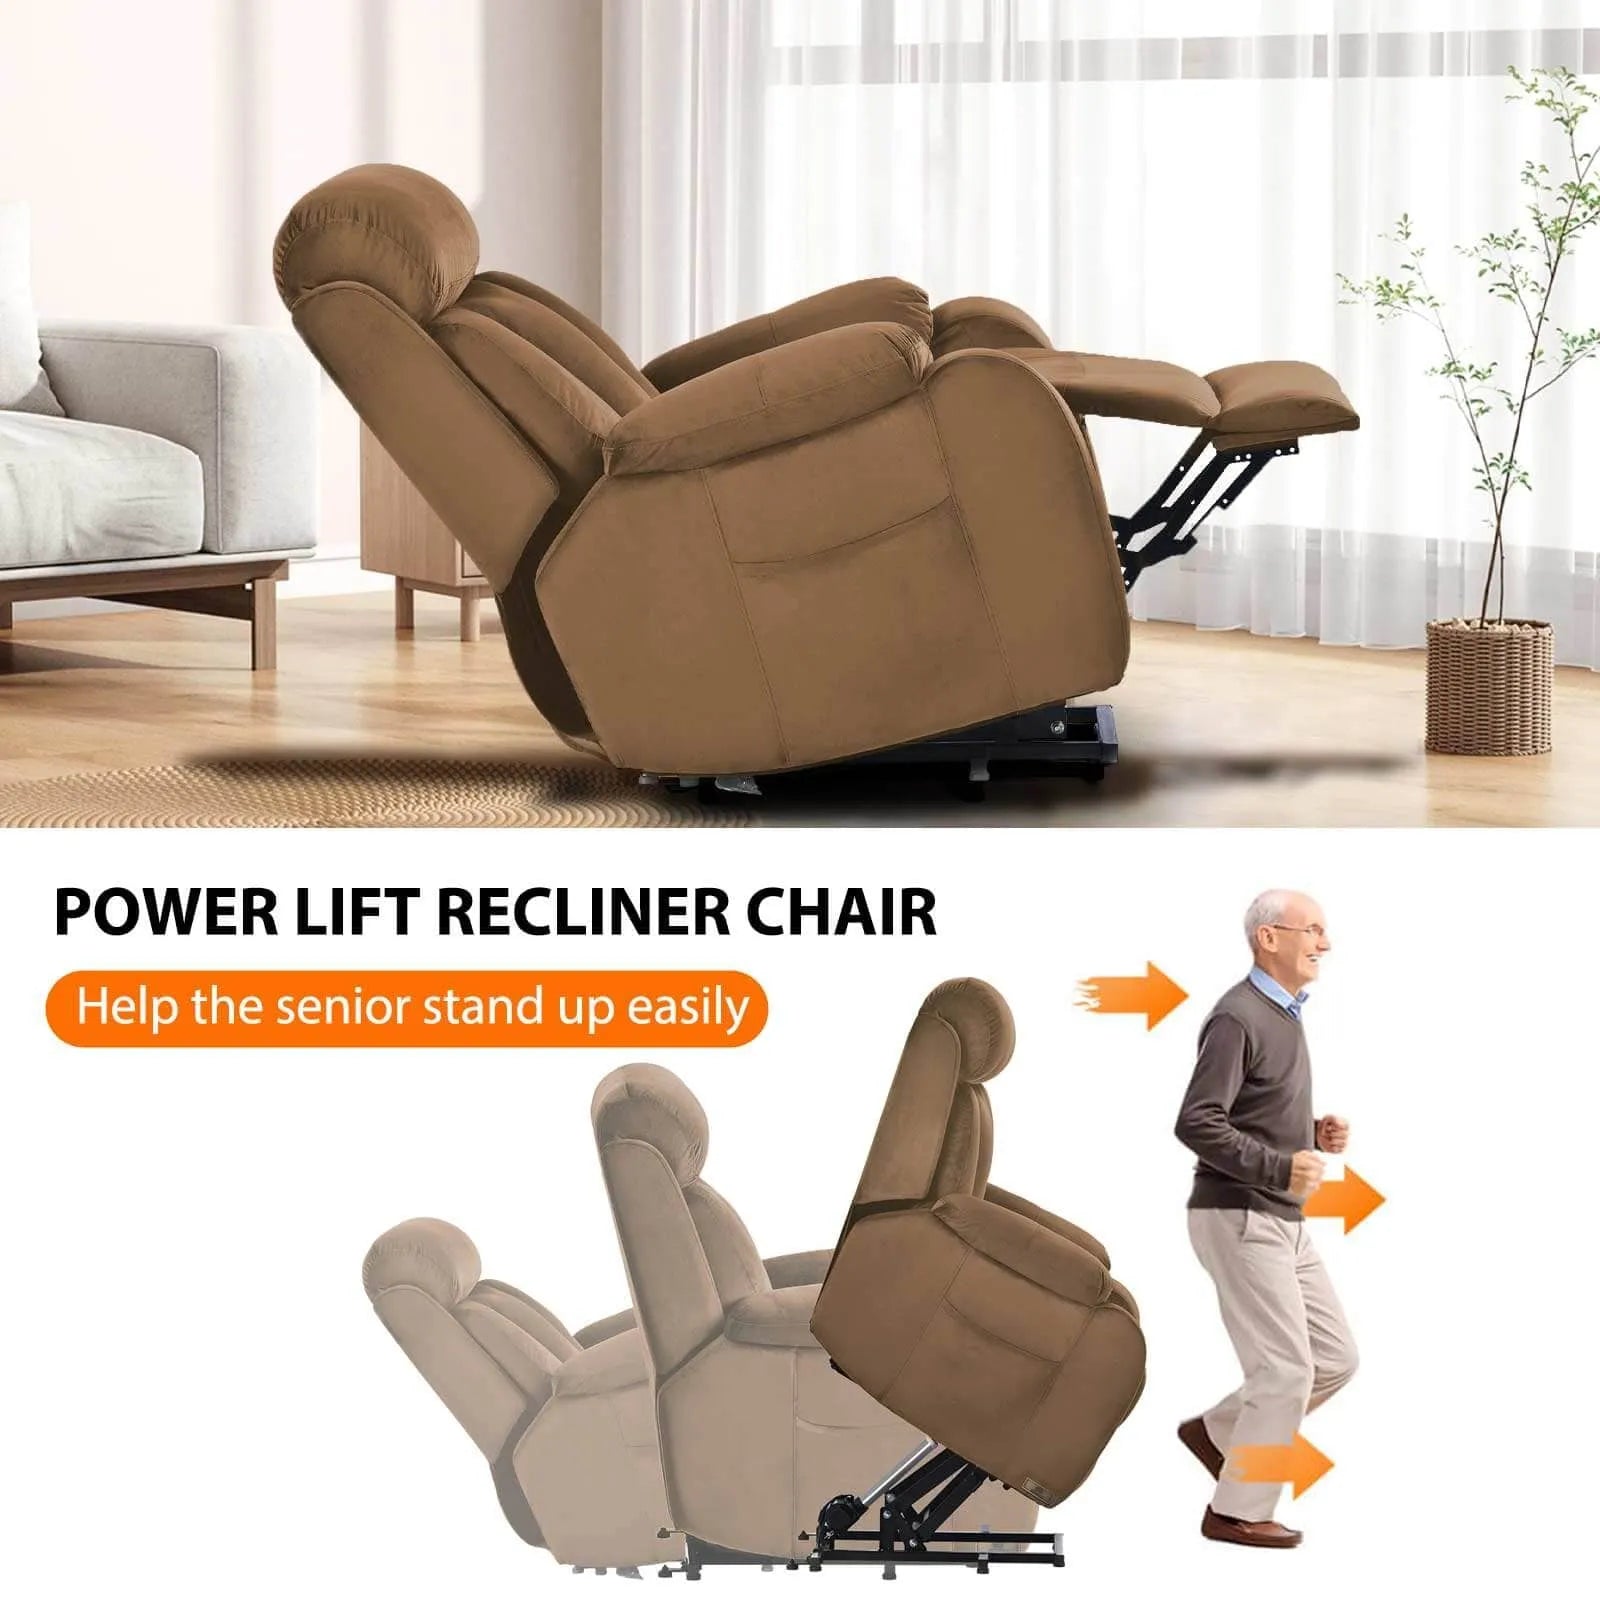 lift chairs that lifts you up